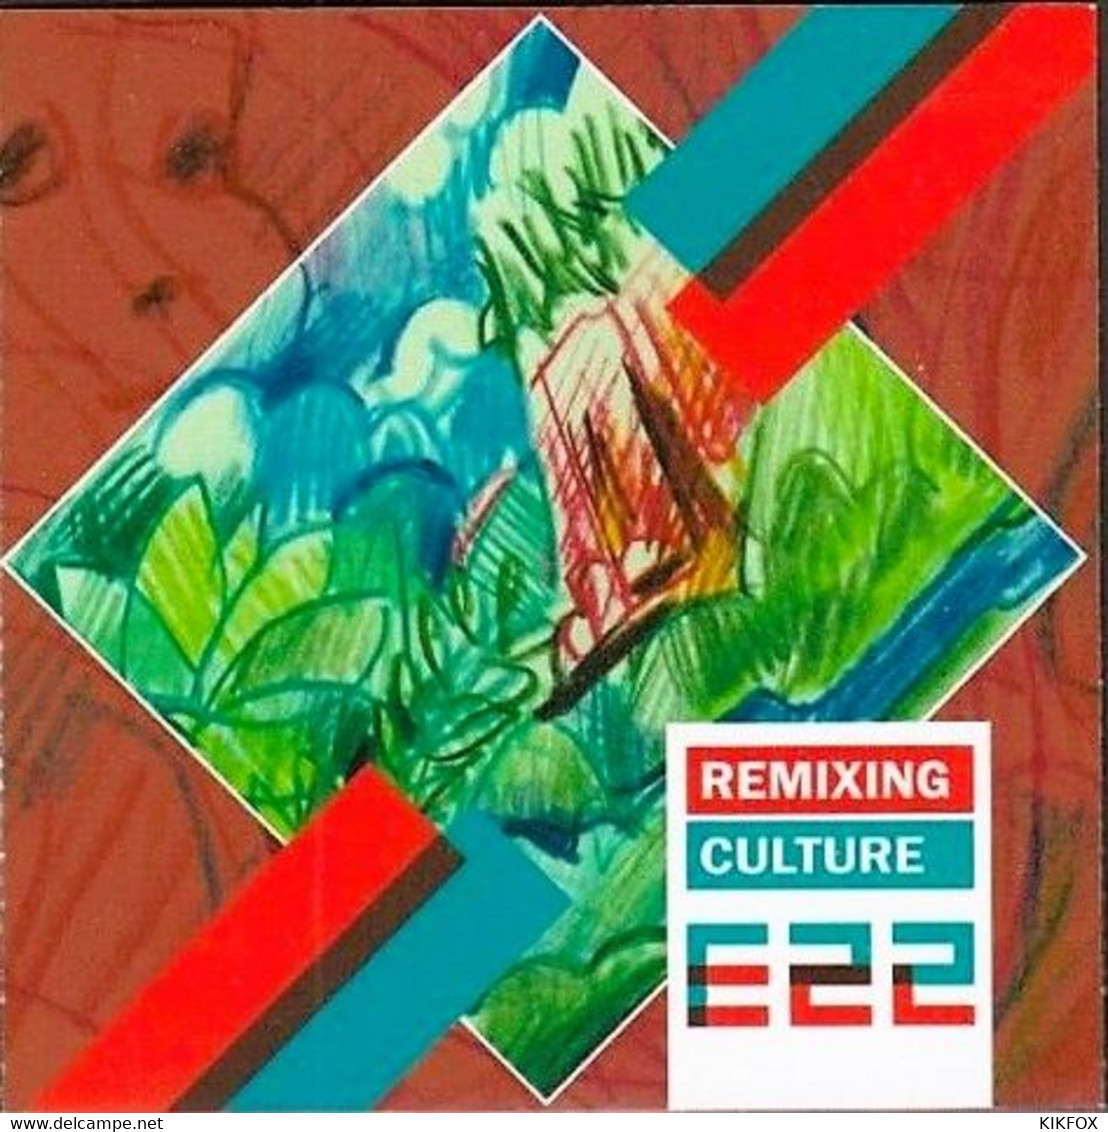 Luxembourg 2022  MH ,CARNET MI 2291 - 2295, Remixing Culture E22- Stamp Booklet L50g  , POSTFRISCH, NEUF - Carnets